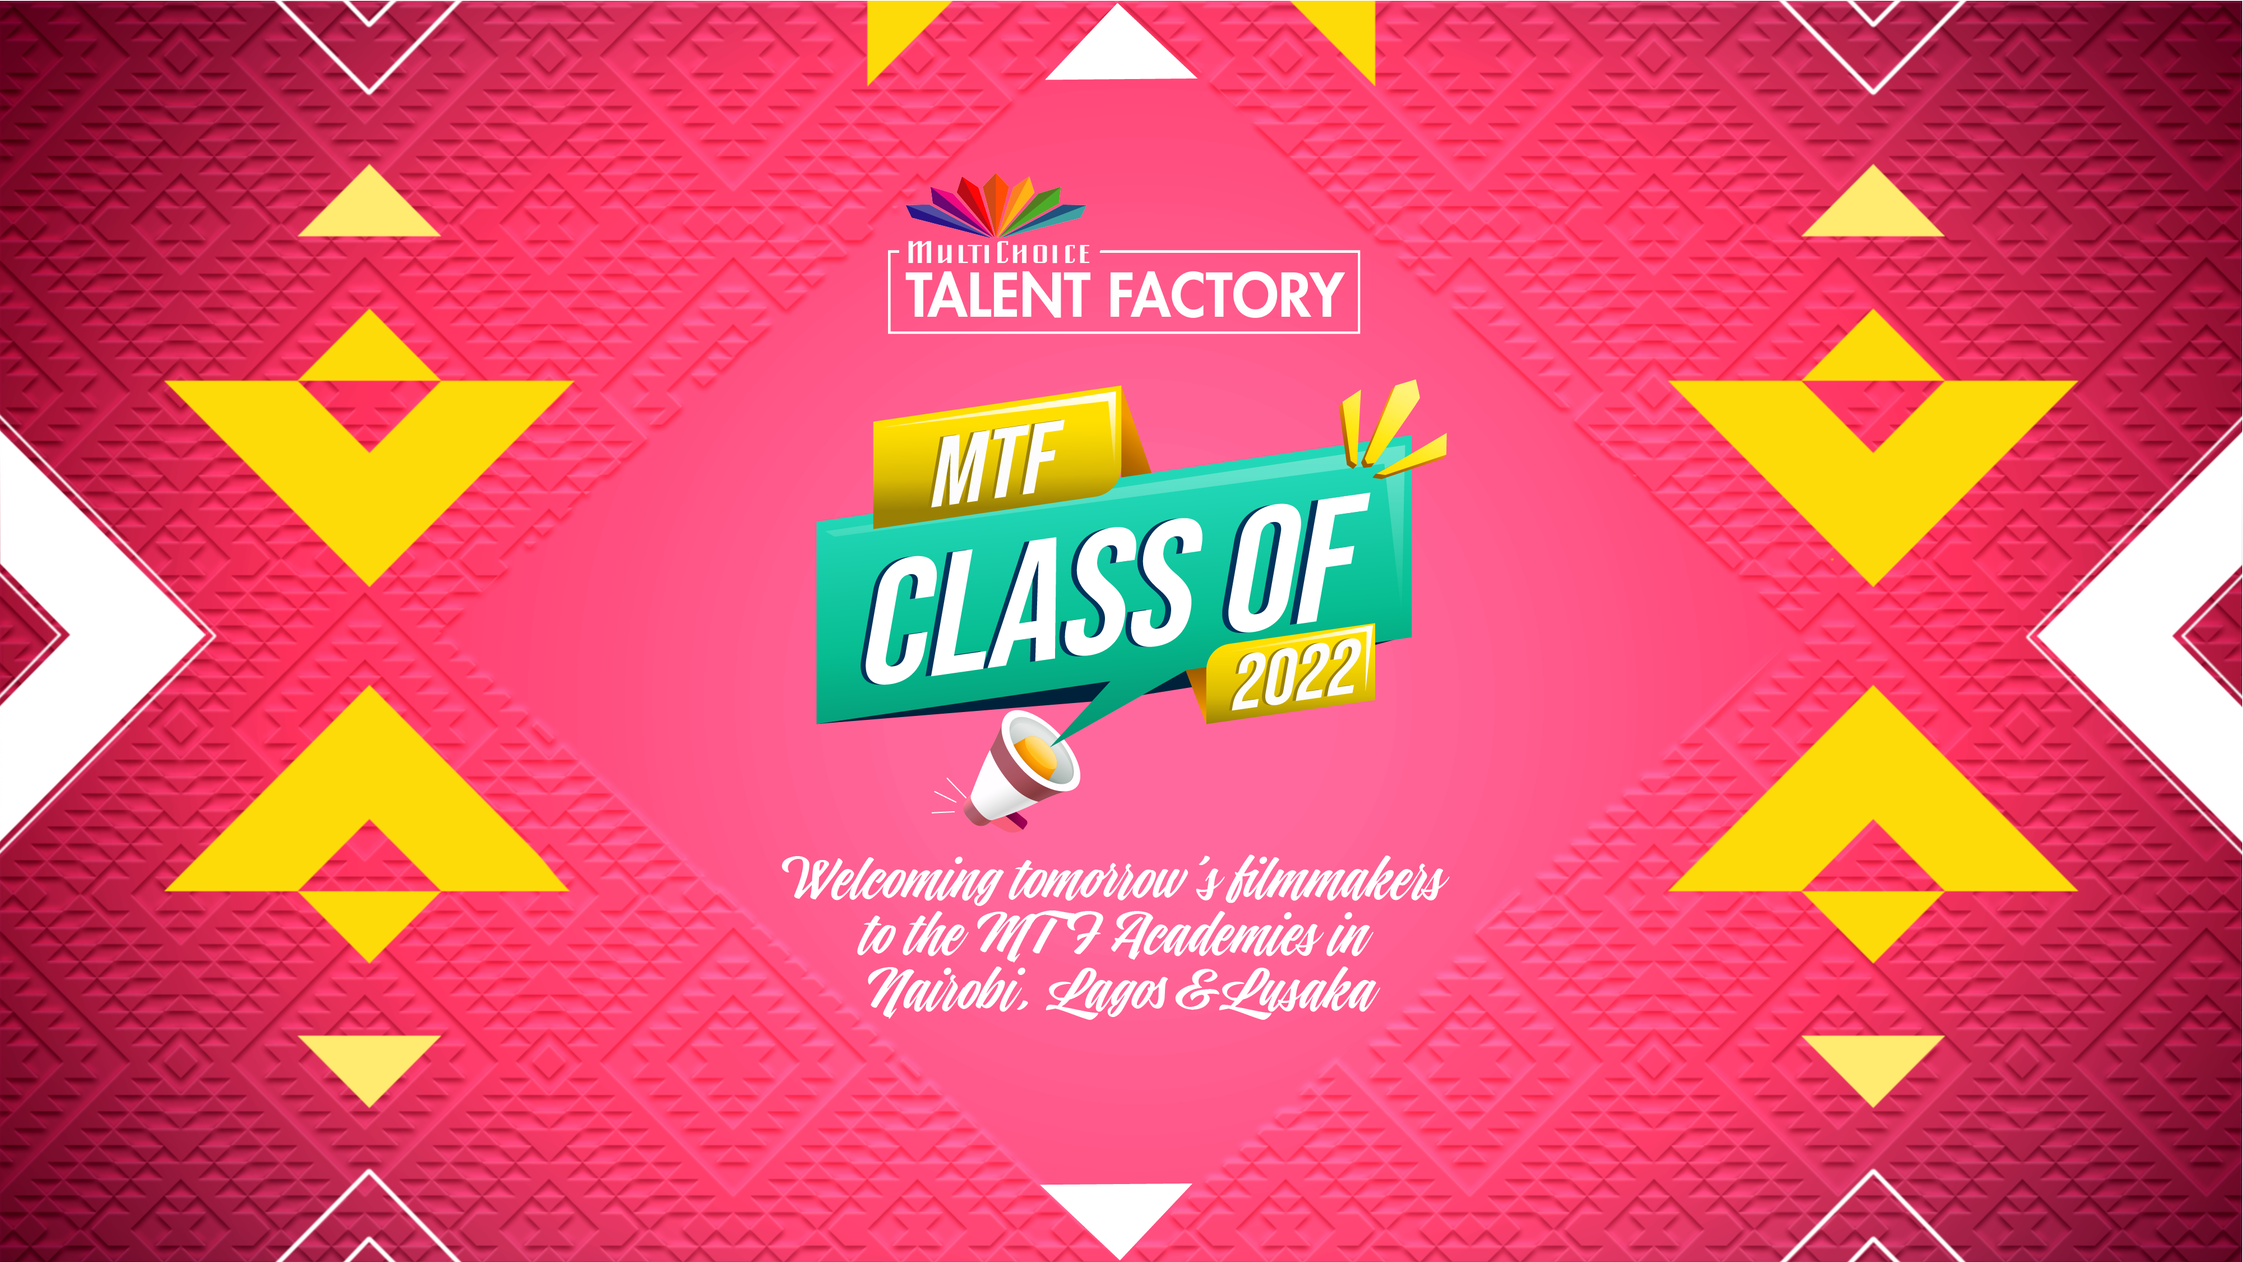 MultiChoice Talent Factory: 60 New Students Get Fully-funded Academic Programme